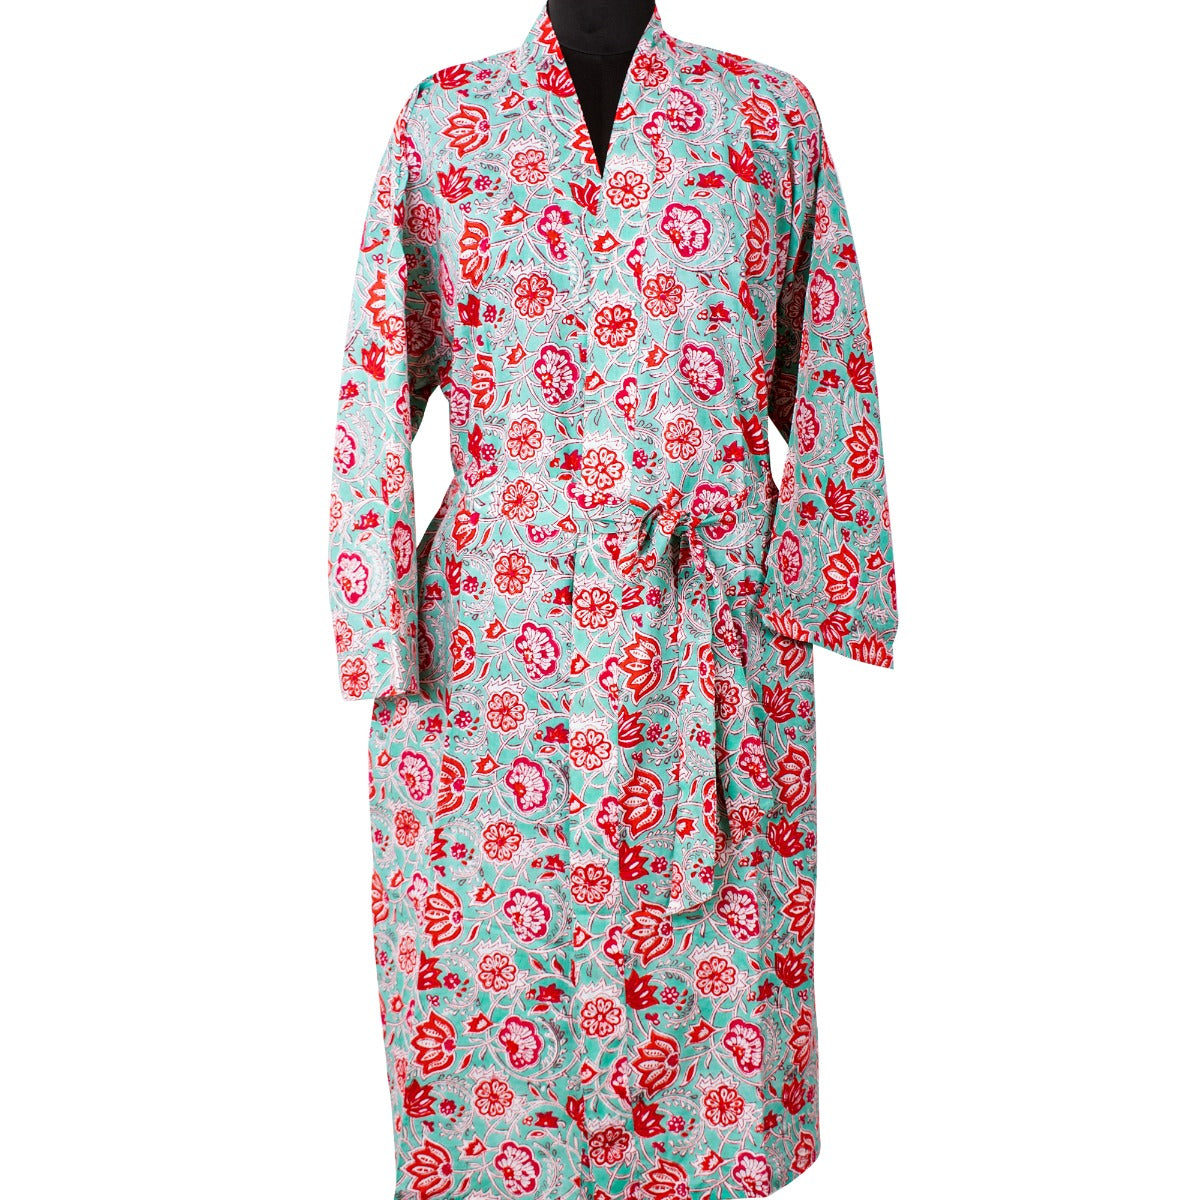 CraftJaipur Multicolor Free Size Floral Bath Robe For Men & Women  (1 Bath Robe, For: Unisex, Worldwide Shipping )